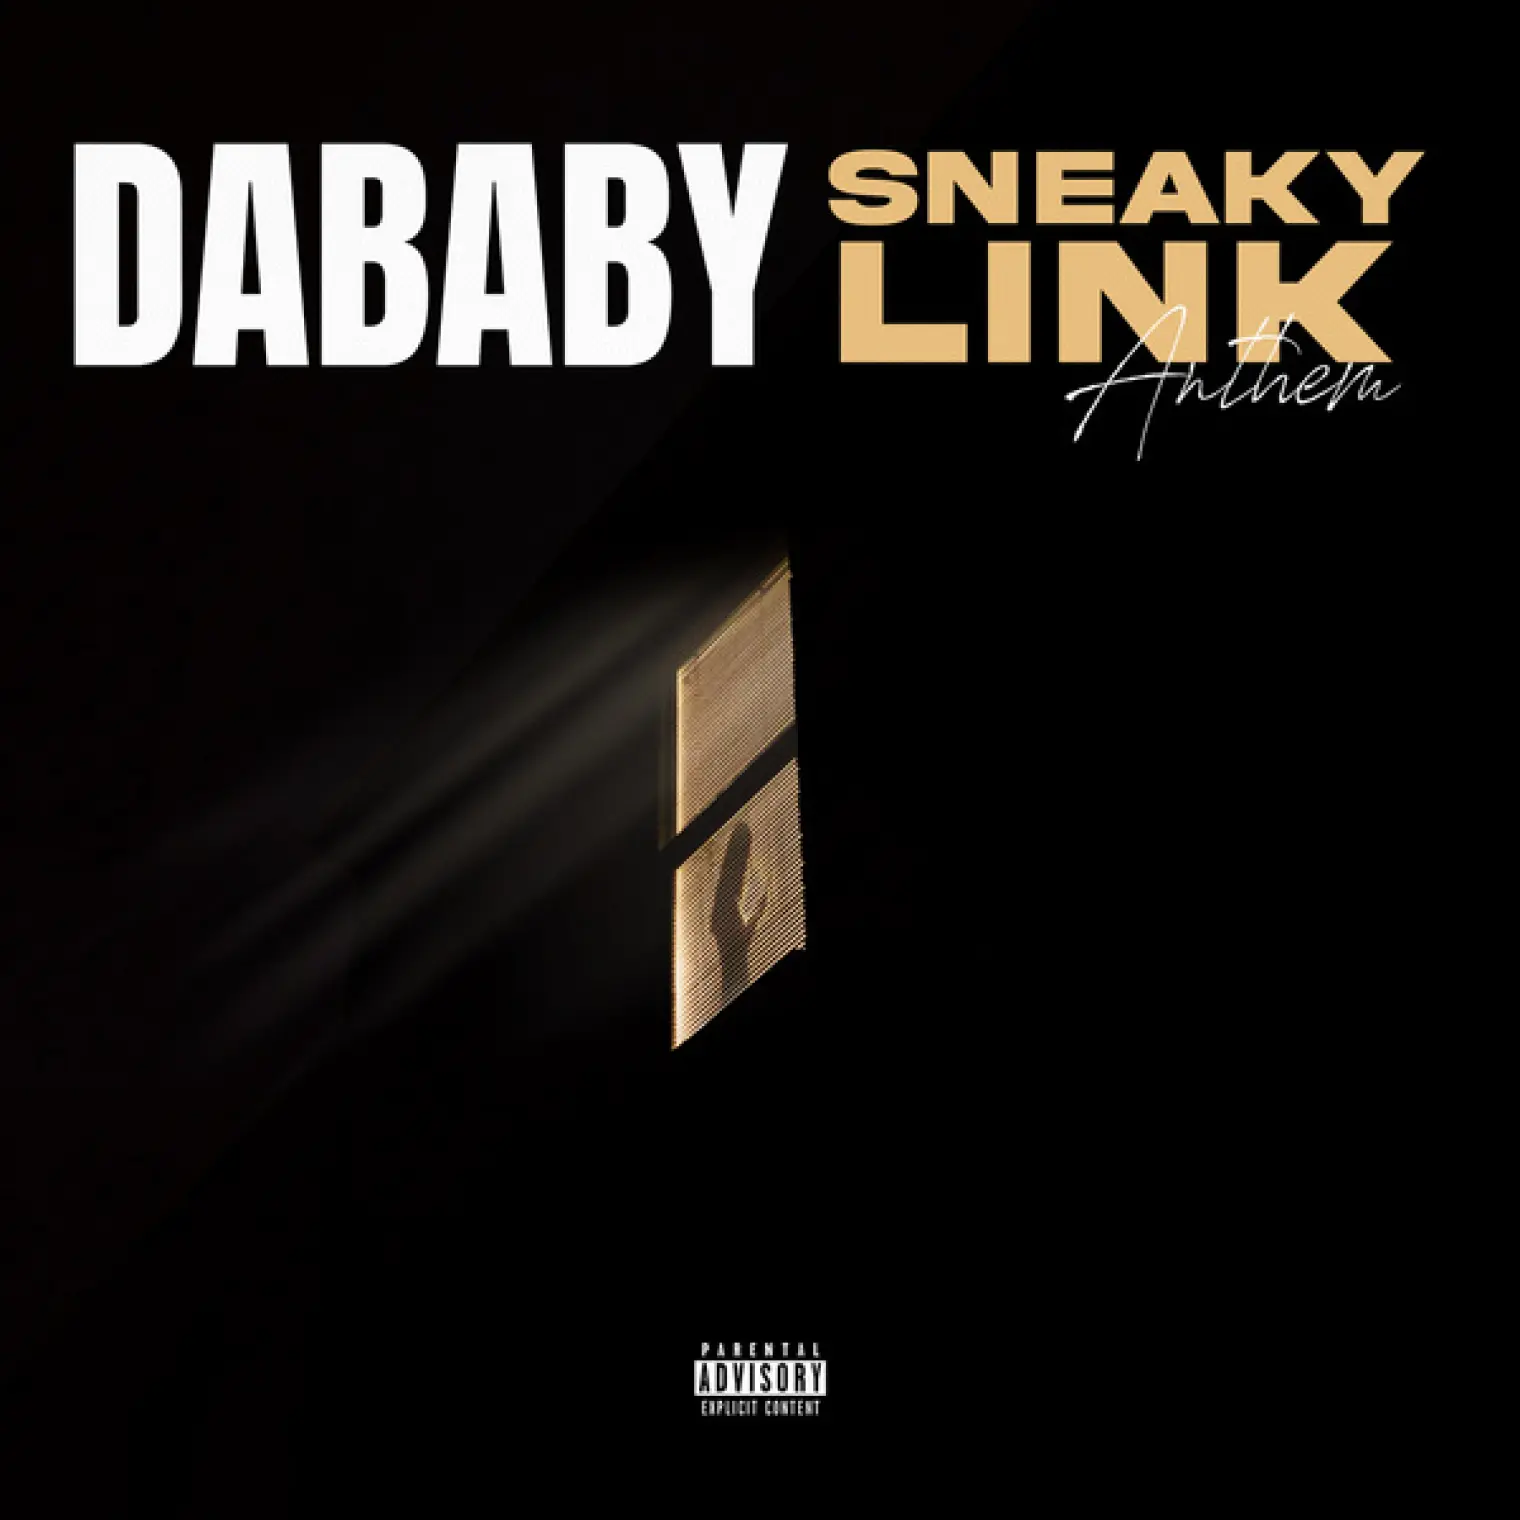 Sneaky Link Anthem -  DaBaby 